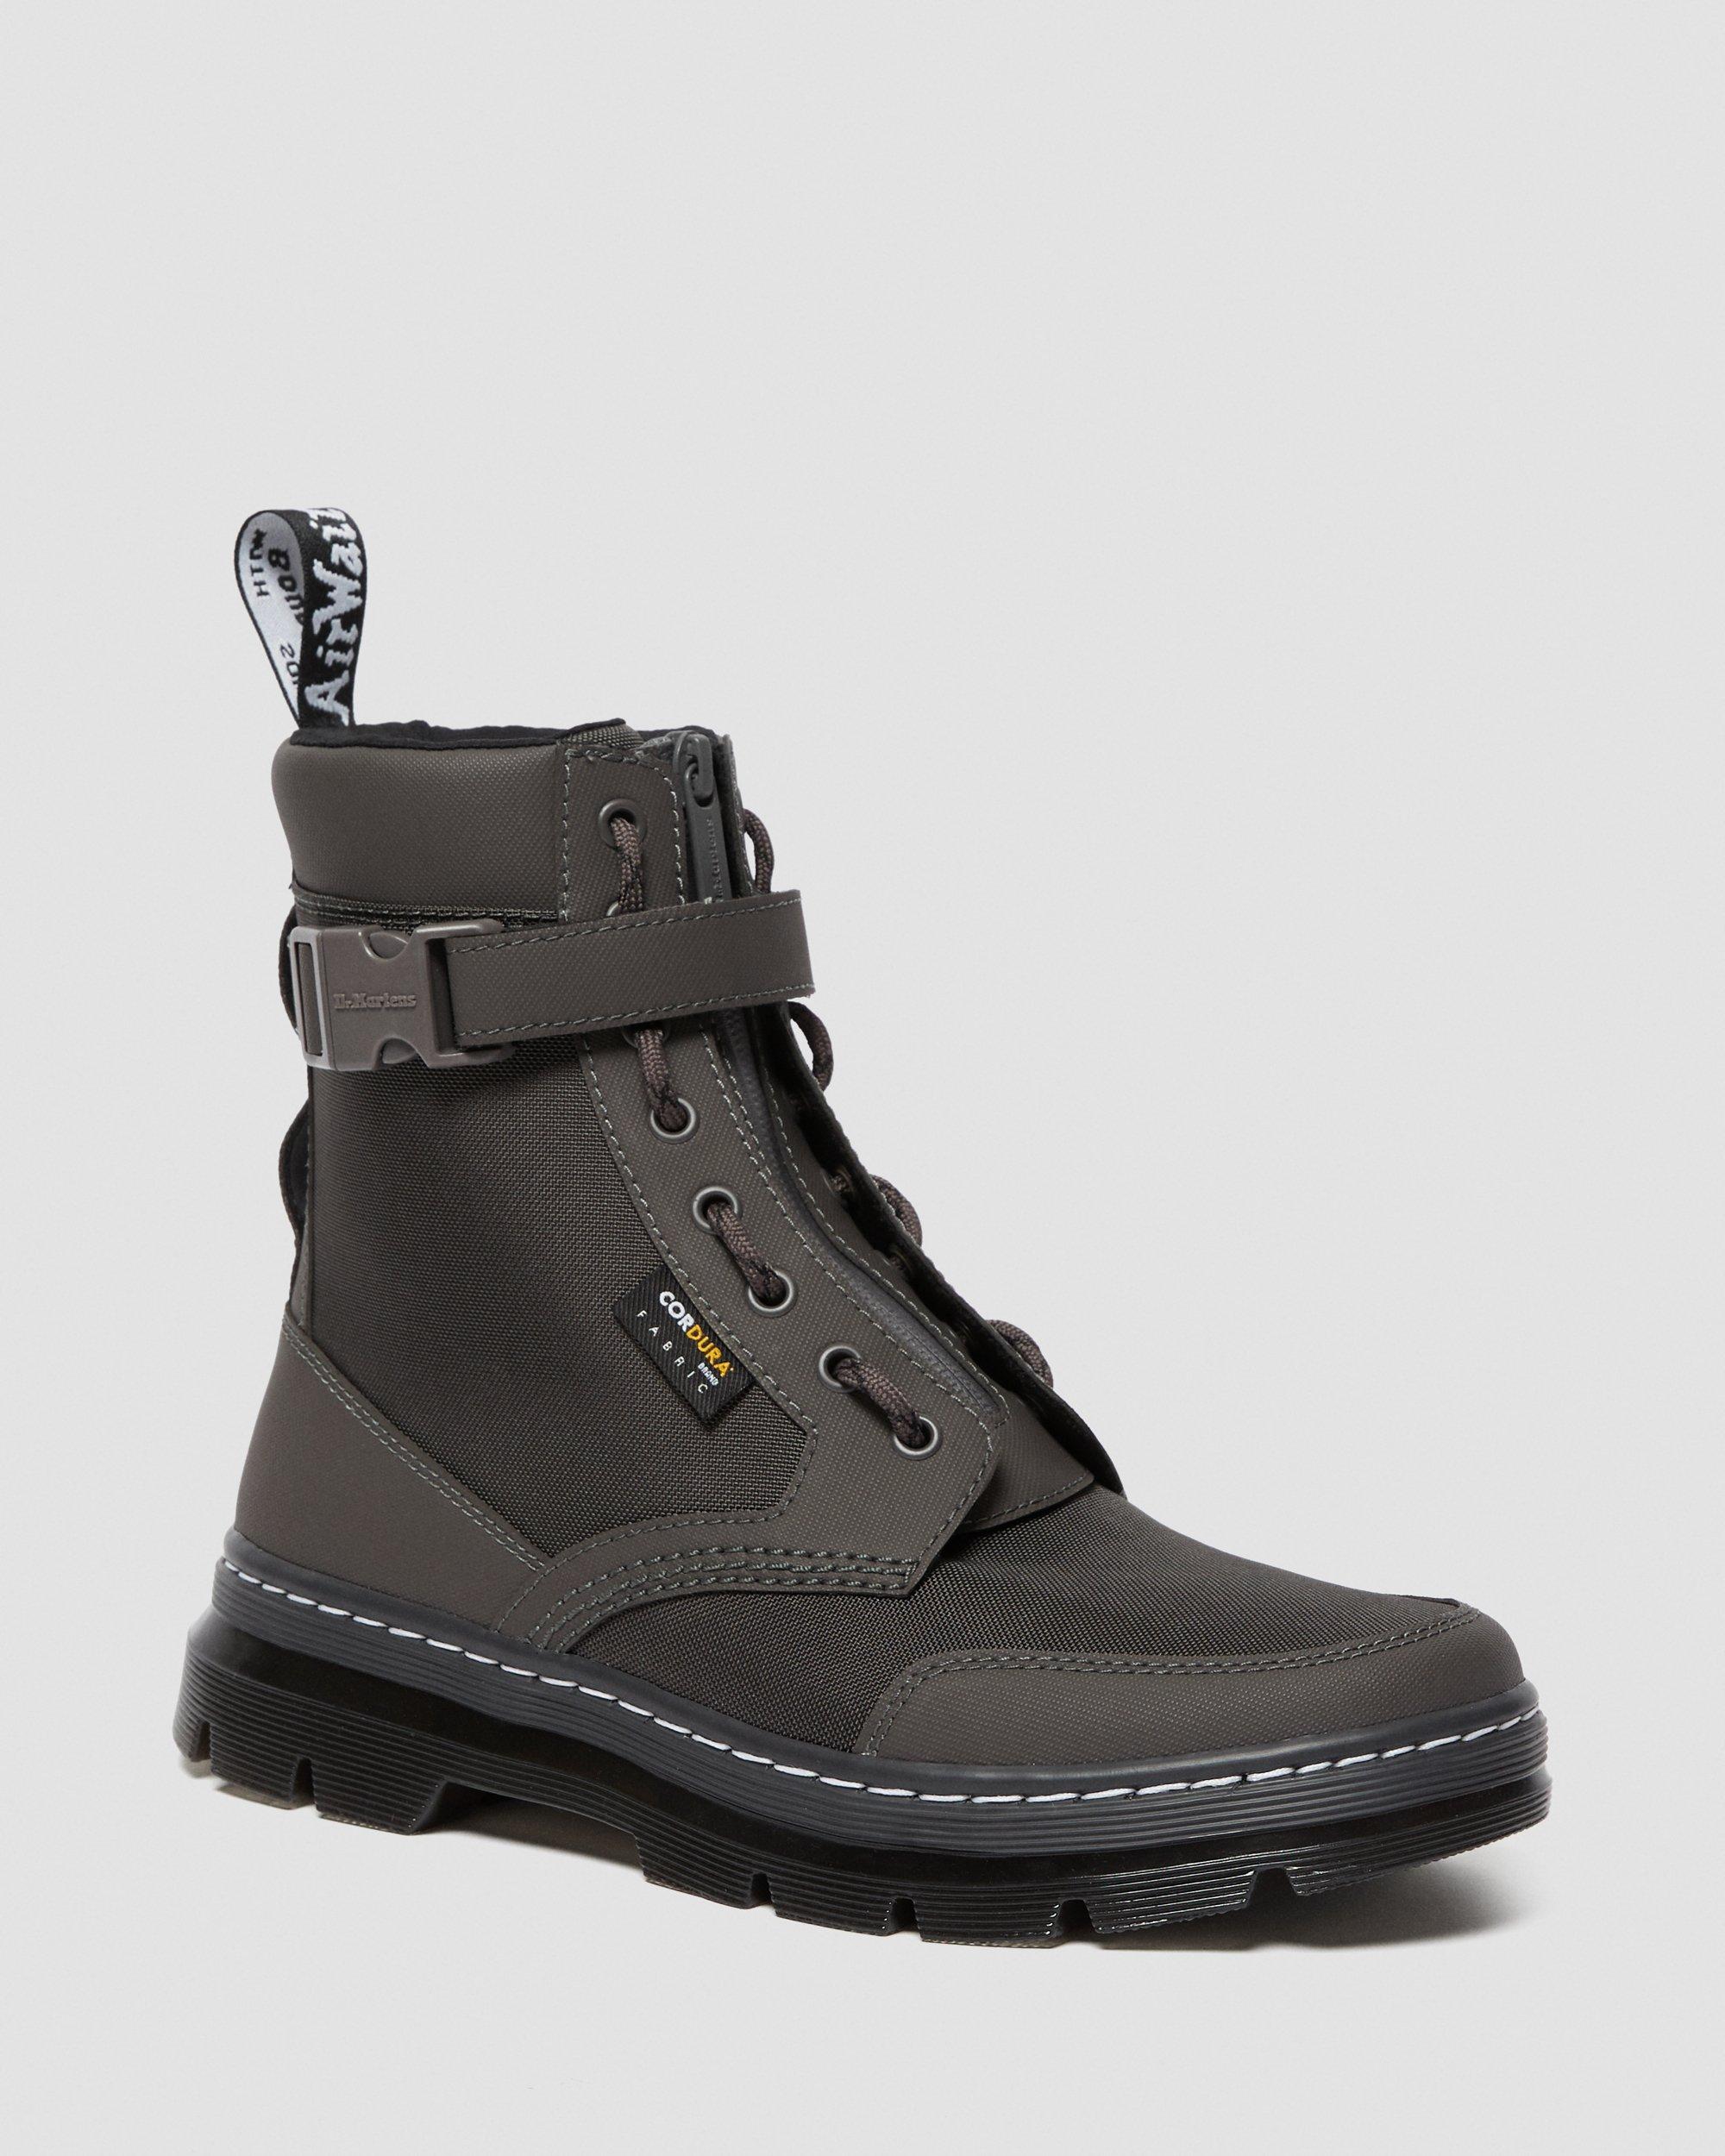 Combs Tech Jungle Casual Boots in Gunmetal | Dr. Martens